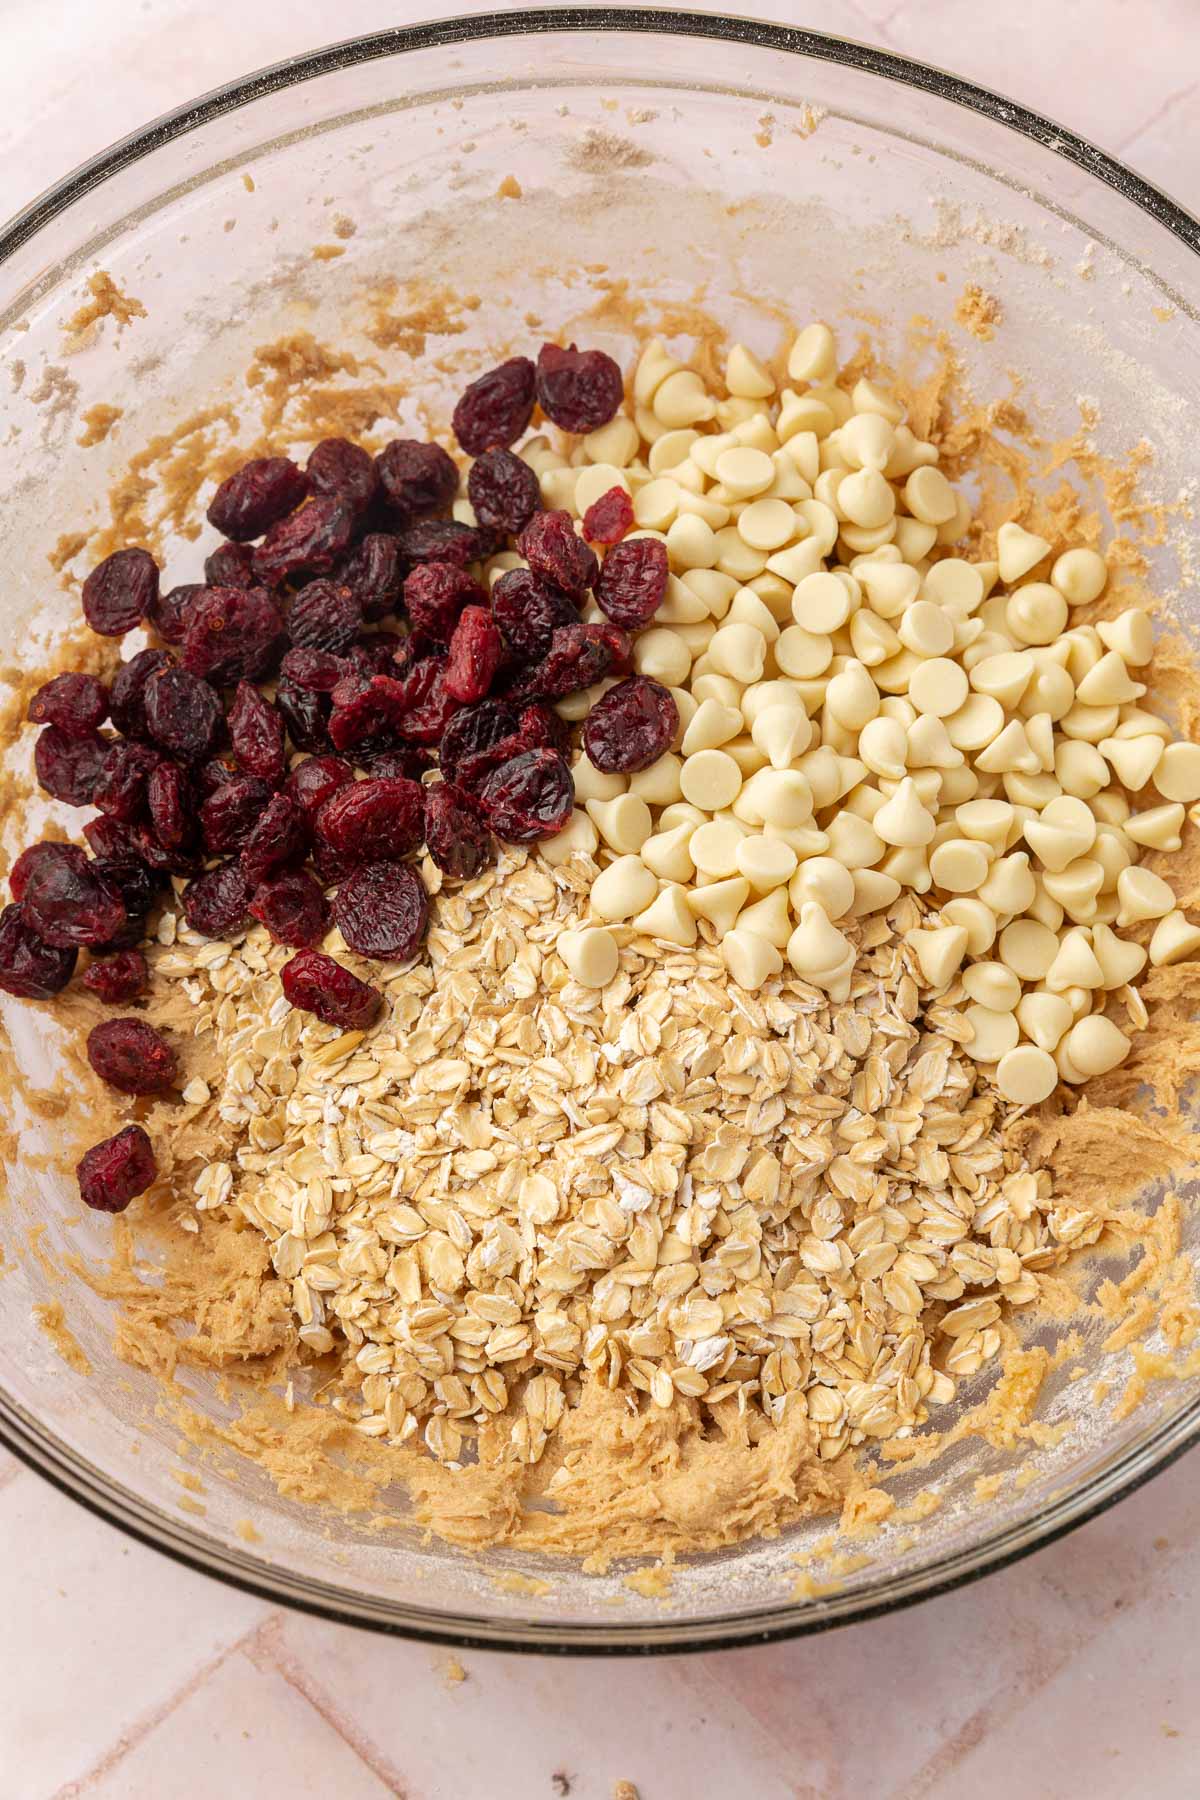 A glass mixing bowl of gluten-free cookie dough topped with dried cranberries, white chocolate chips and gluten-free certified oats.